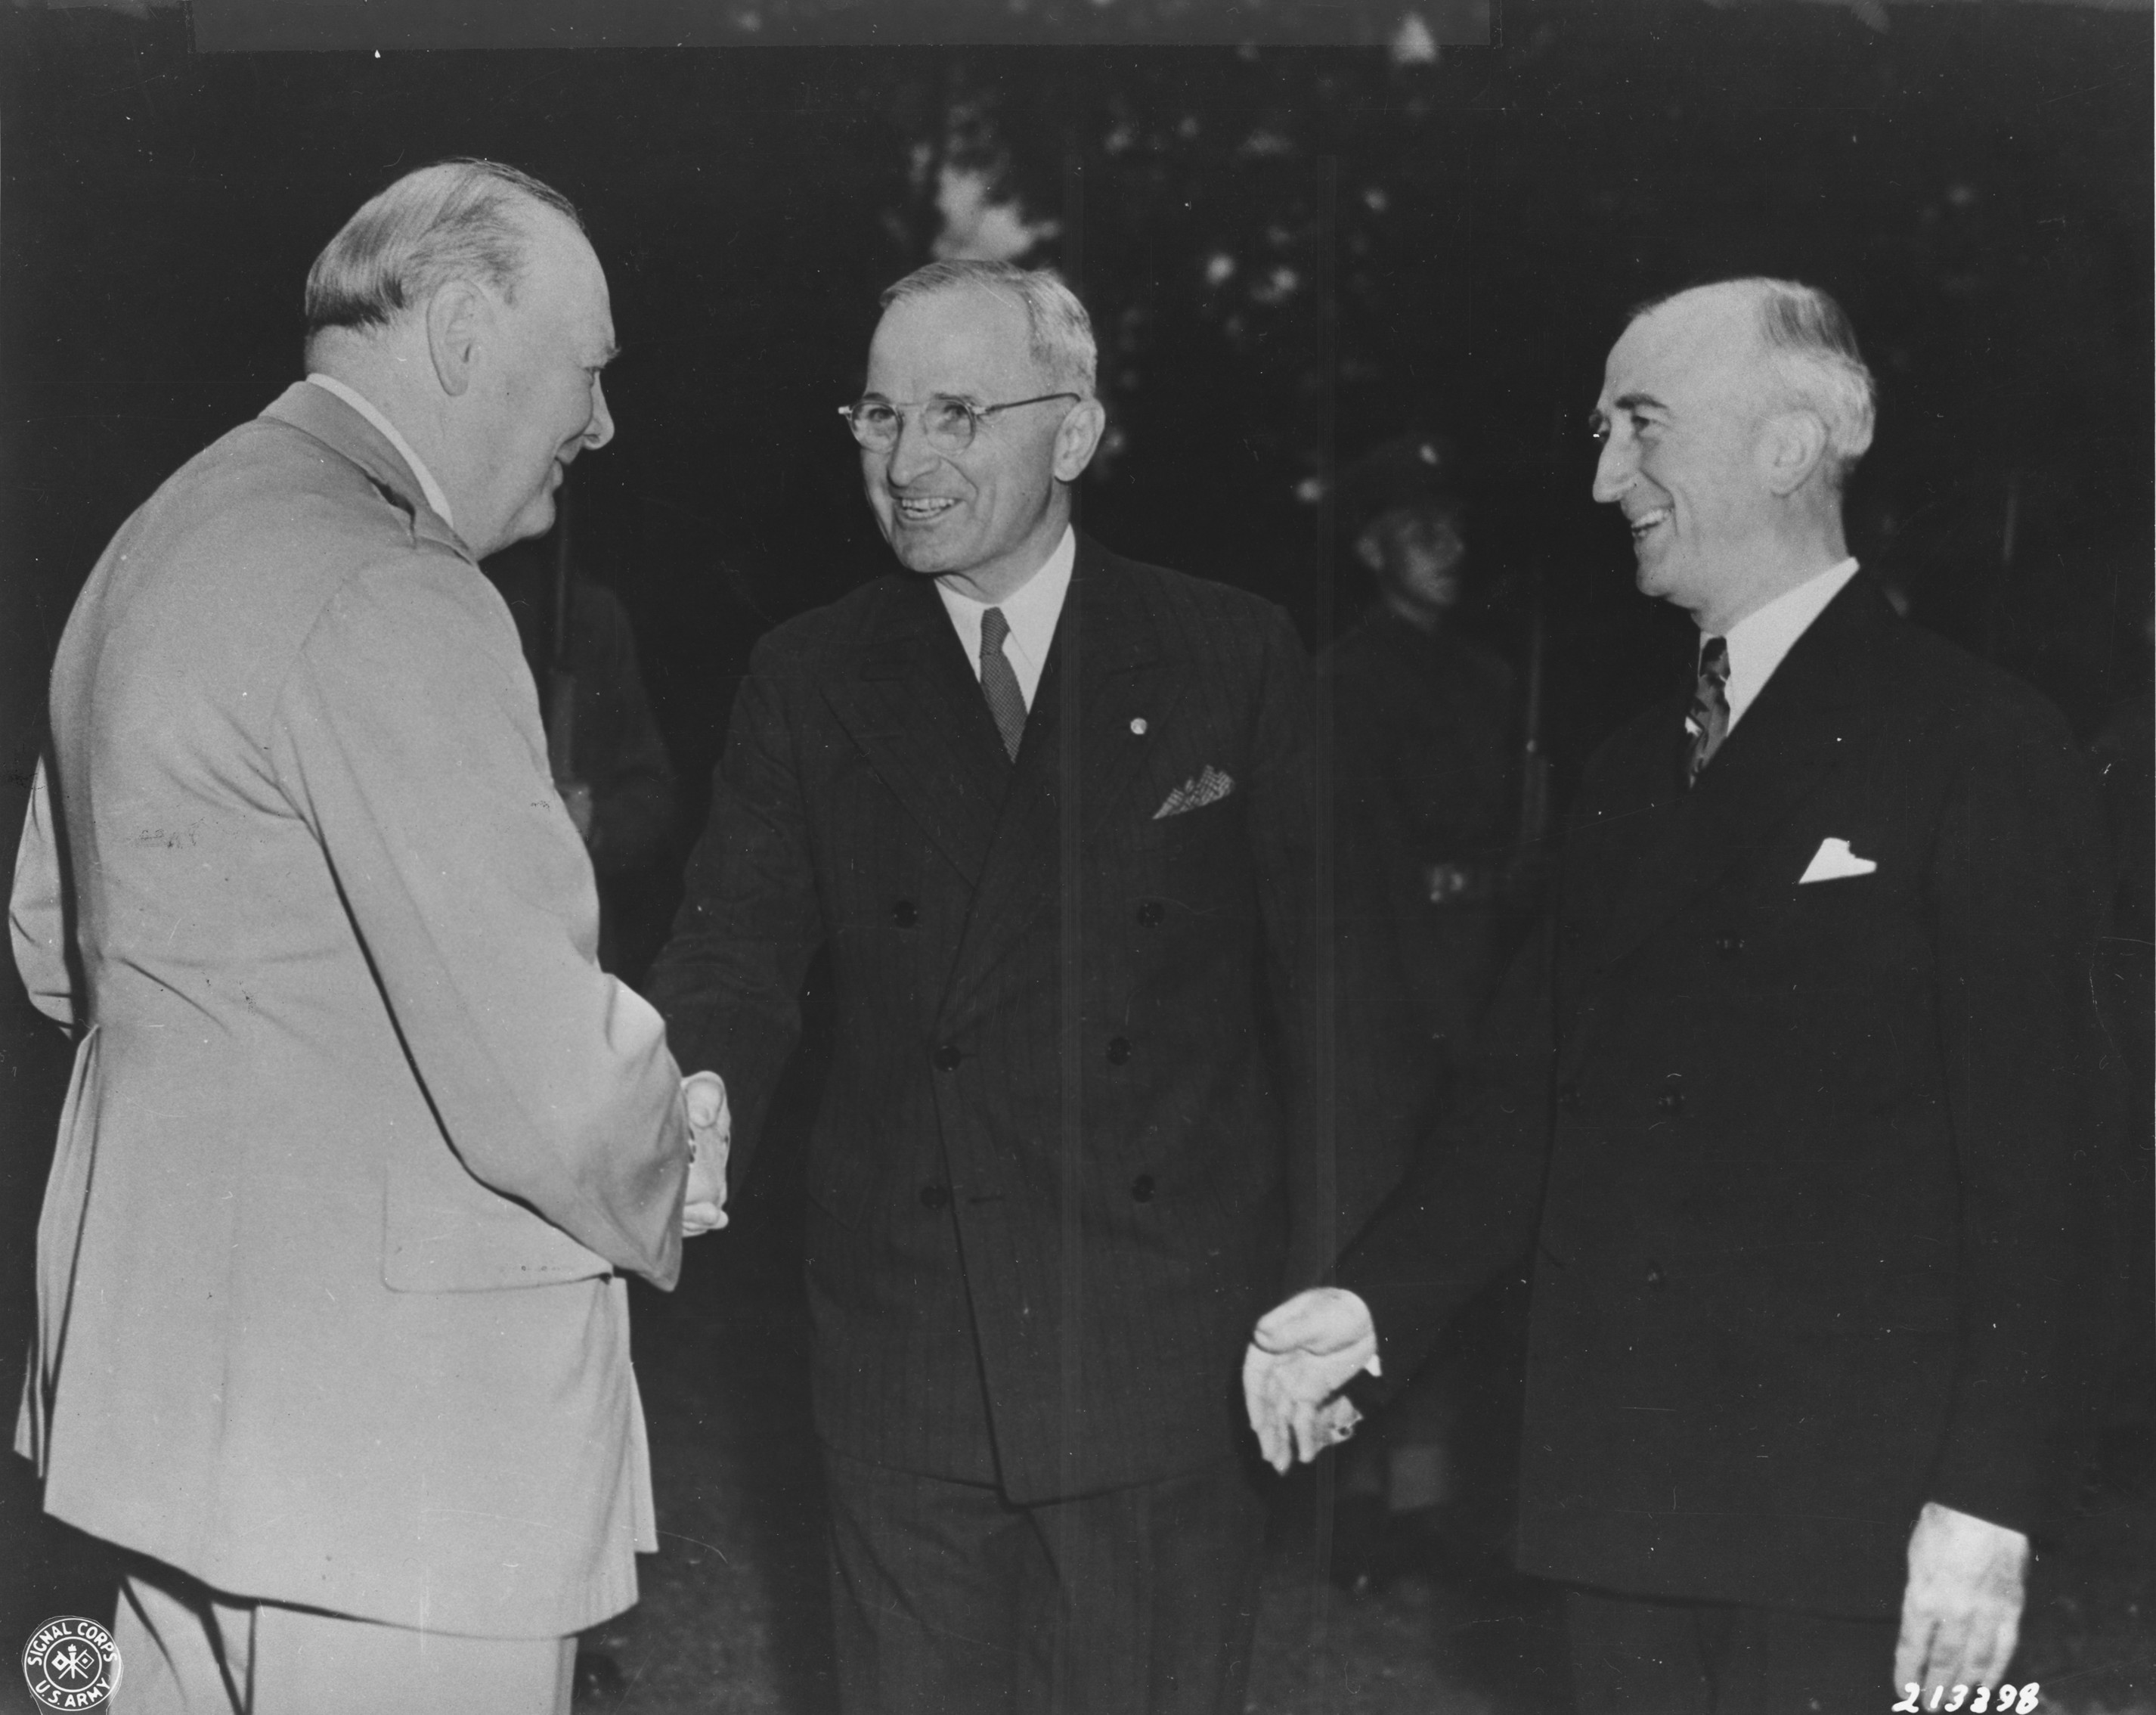 Winston Churchill, Harry Truman, and James Byrnes during the Potsdam Conference, Germany, 23 Jul 1945